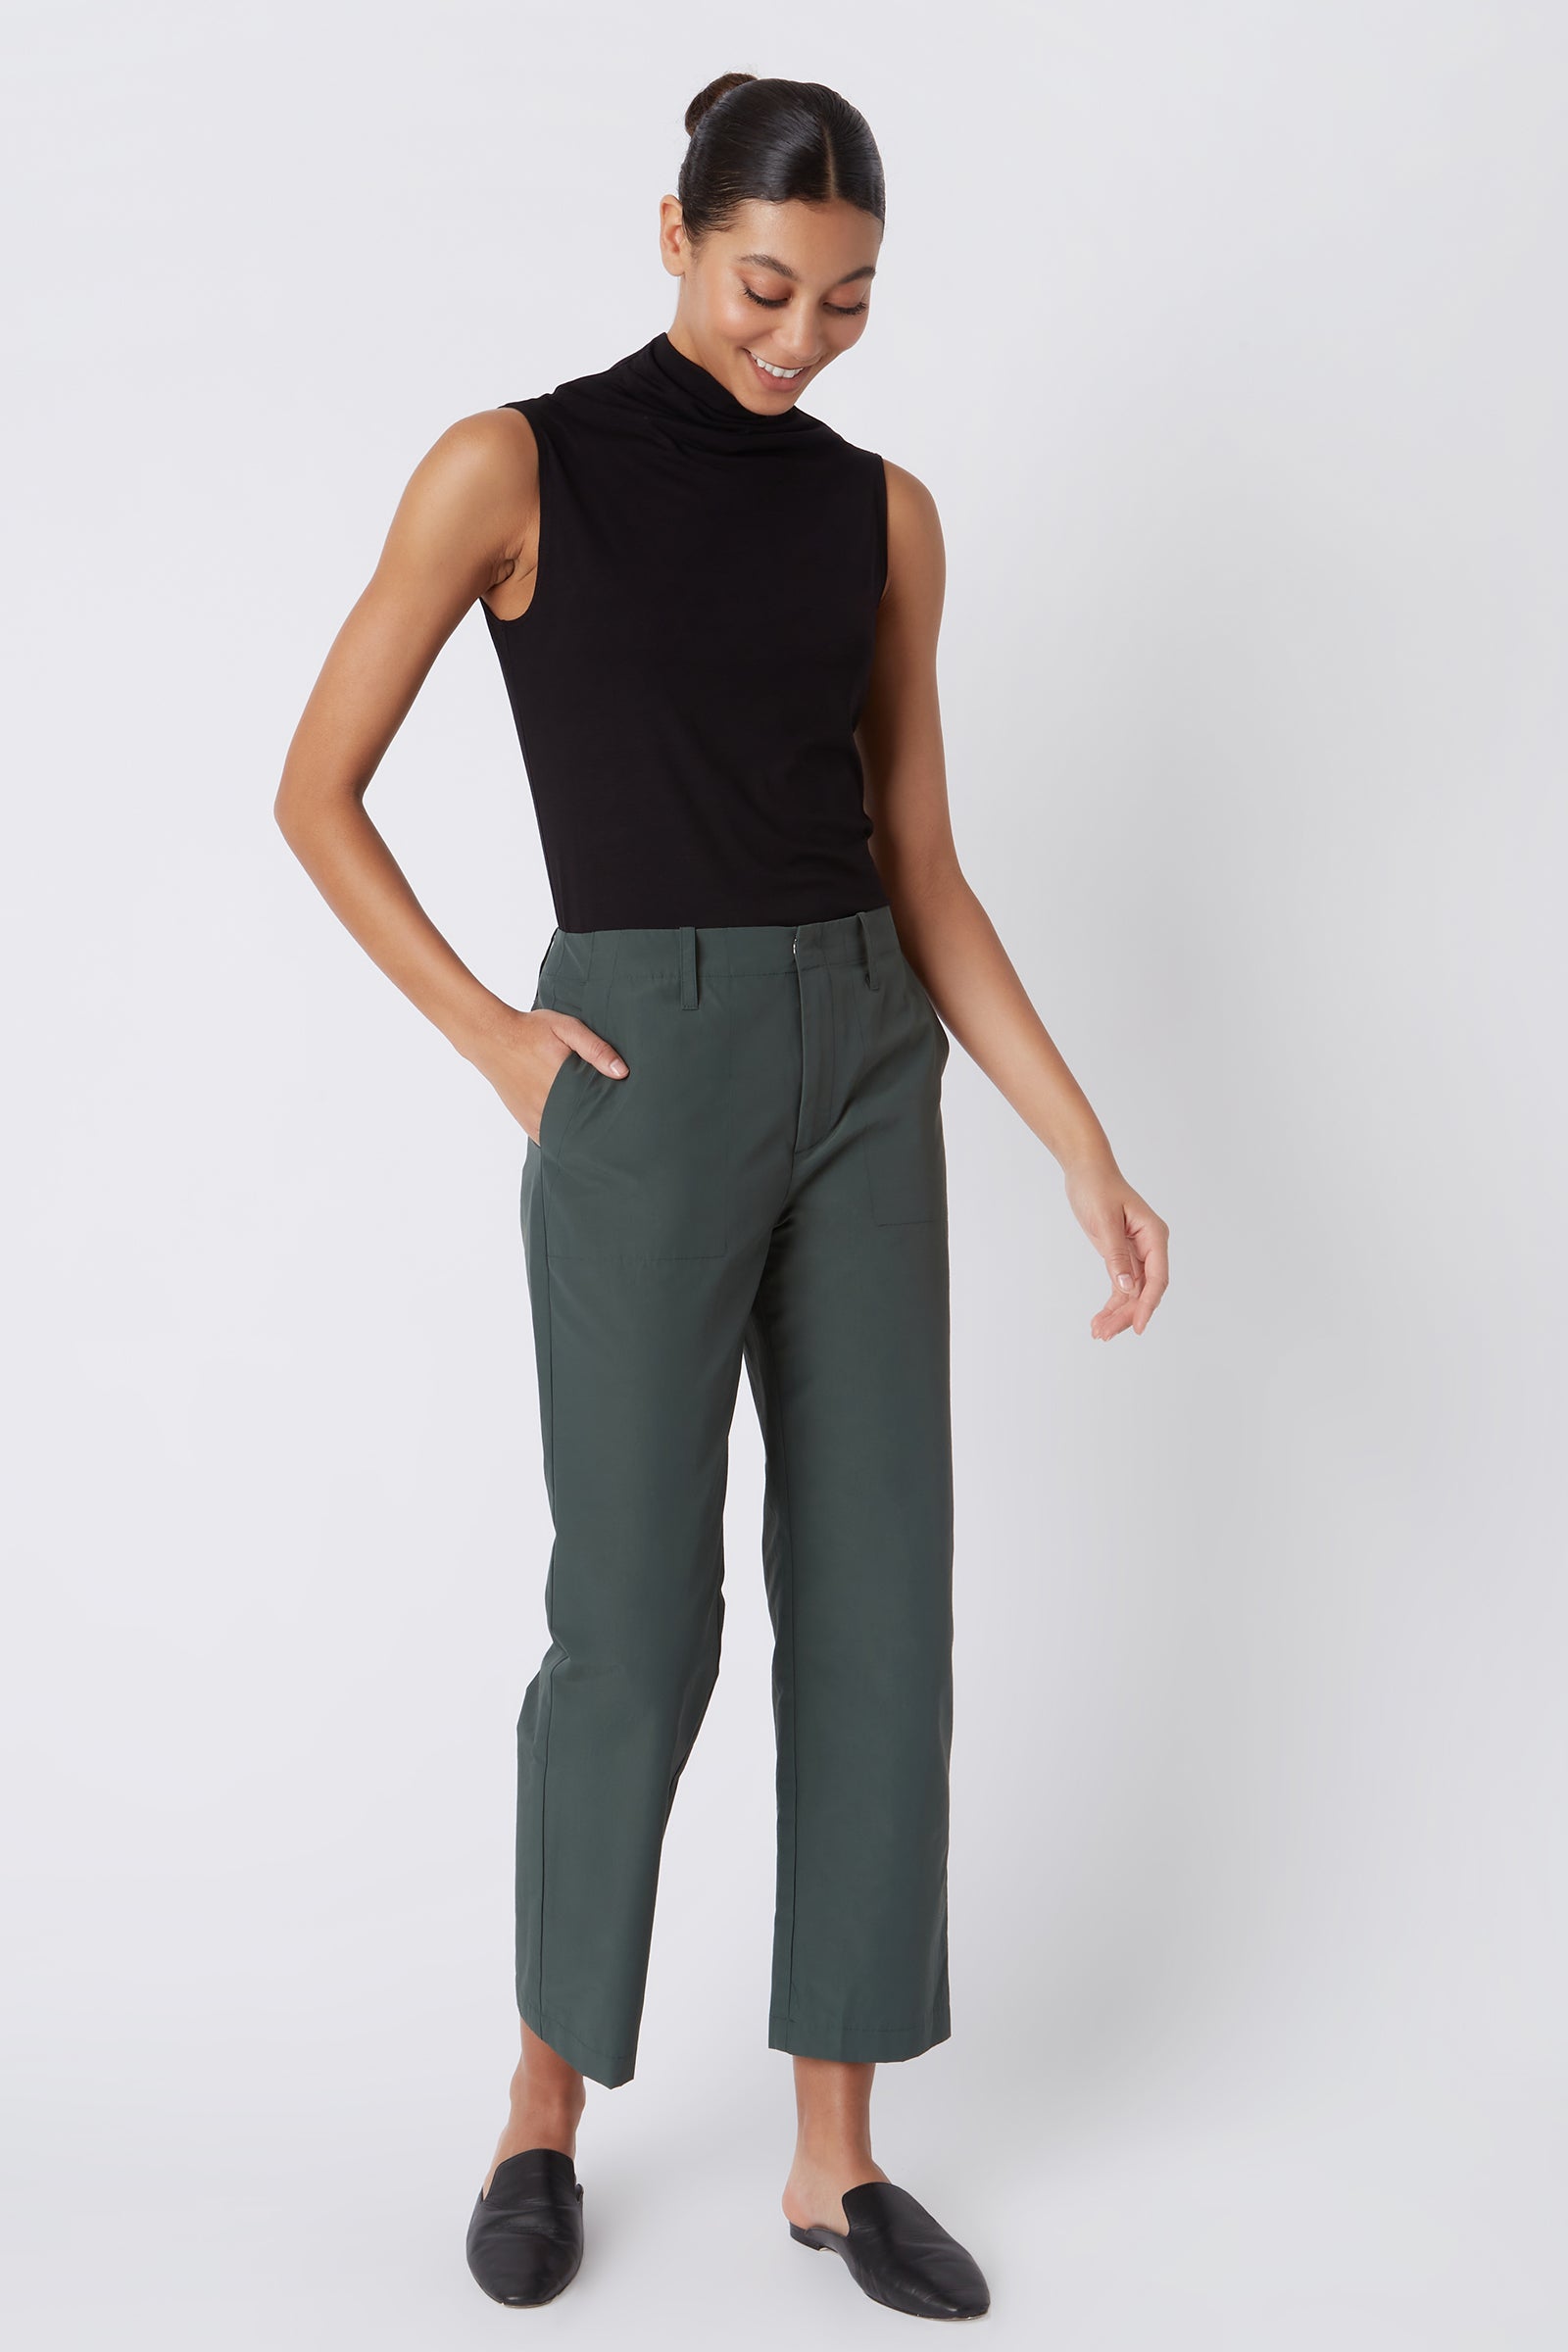 Kal Rieman Francoise Cigarette Pant in Loden Italian Broadcloth on Model with Hand in Pocket Full Front View